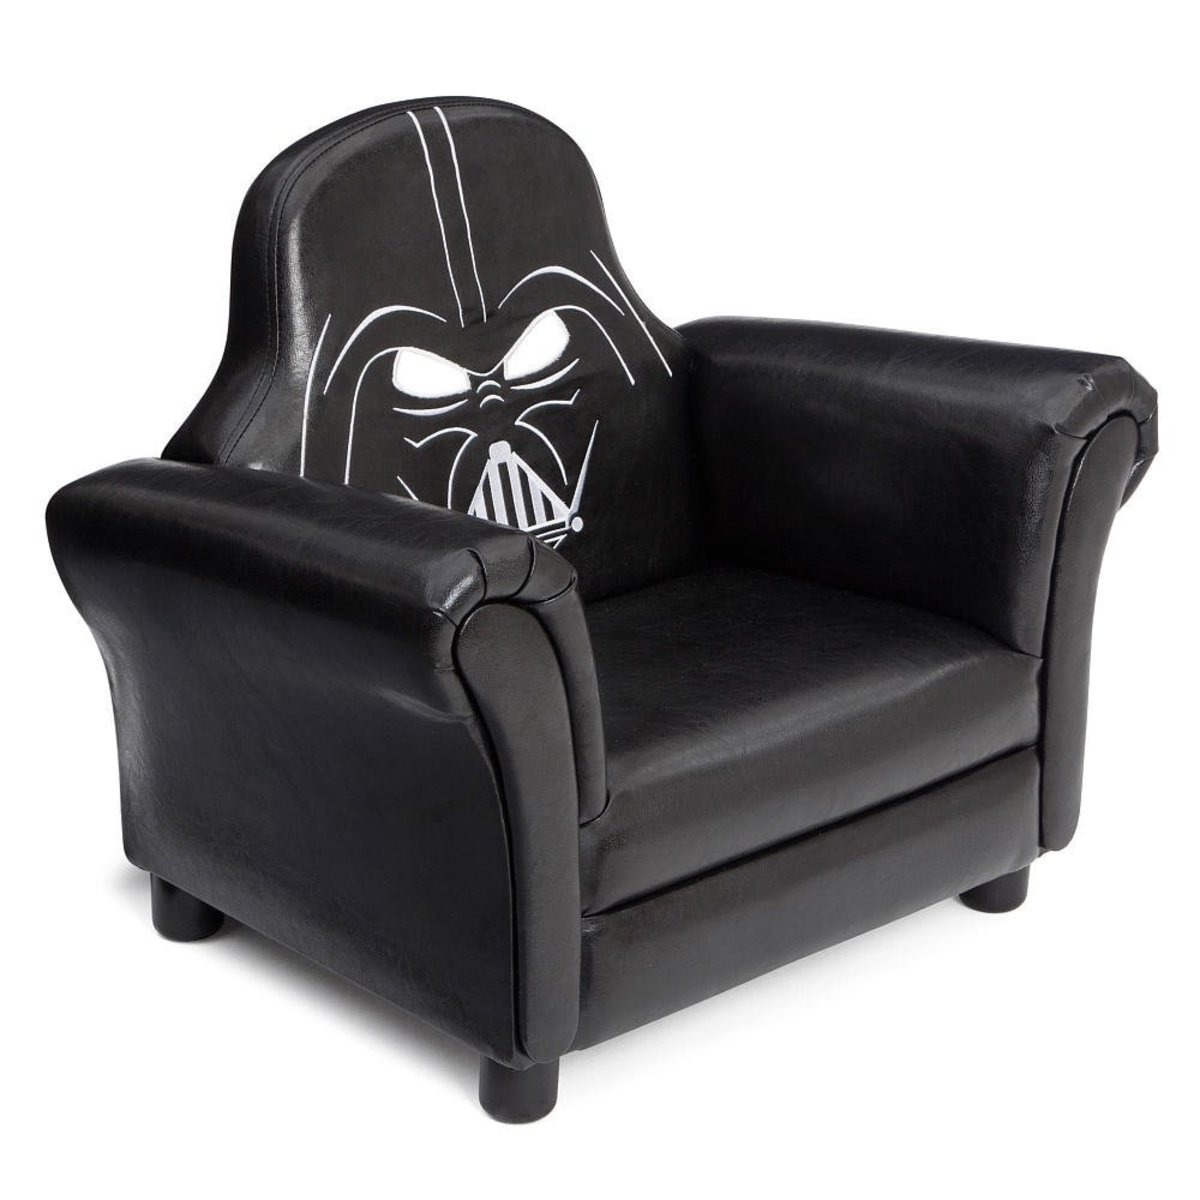 how-to-decorate-a-star-wars-themed-bedroom